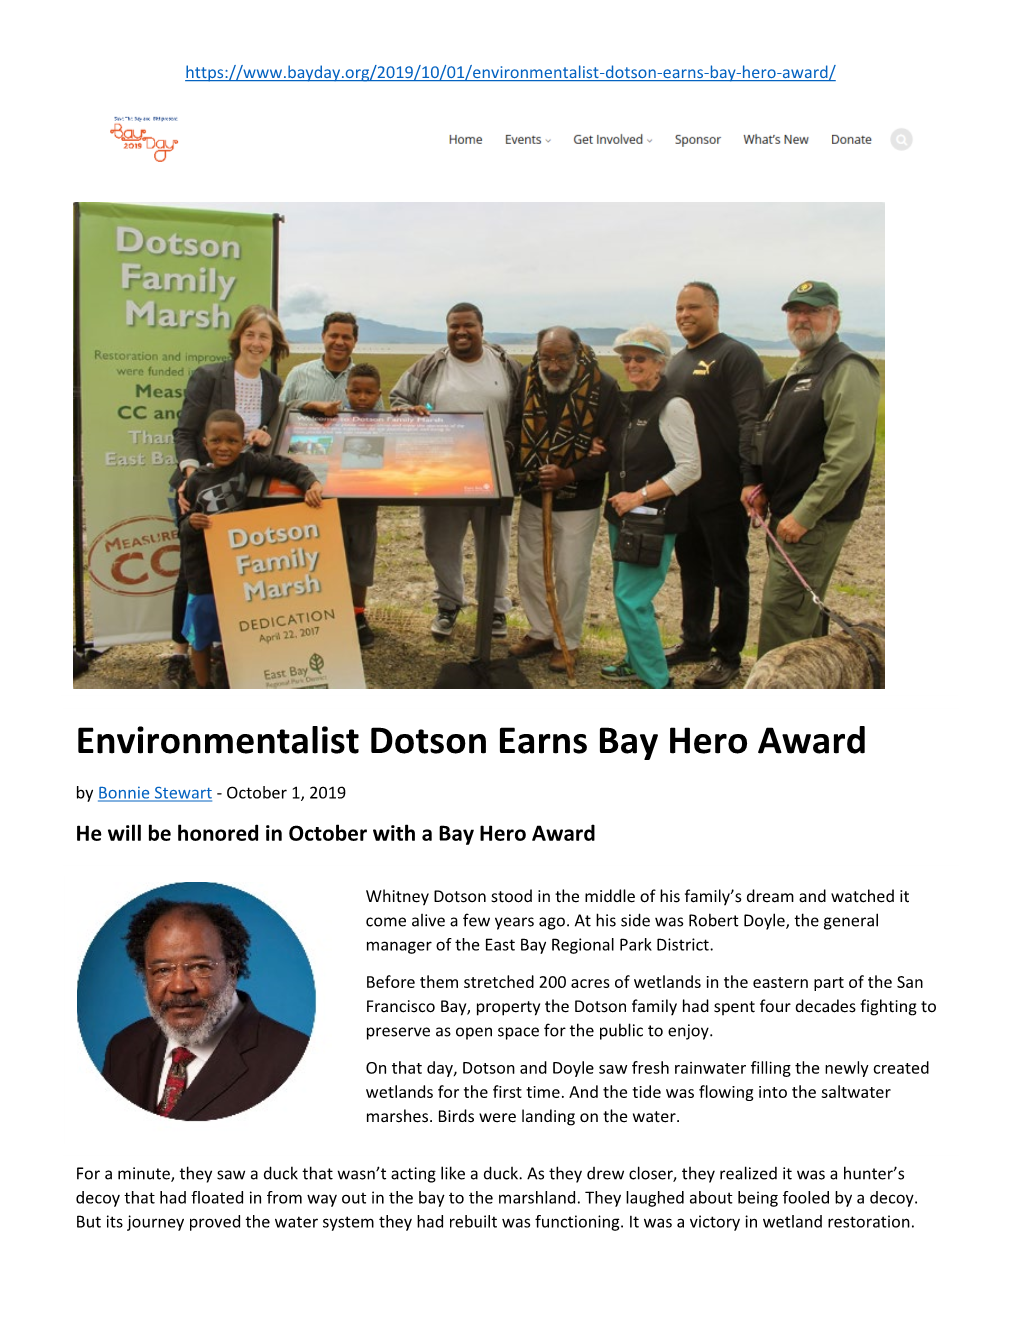 Environmentalist Dotson Earns Bay Hero Award by Bonnie Stewart - October 1, 2019 He Will Be Honored in October with a Bay Hero Award